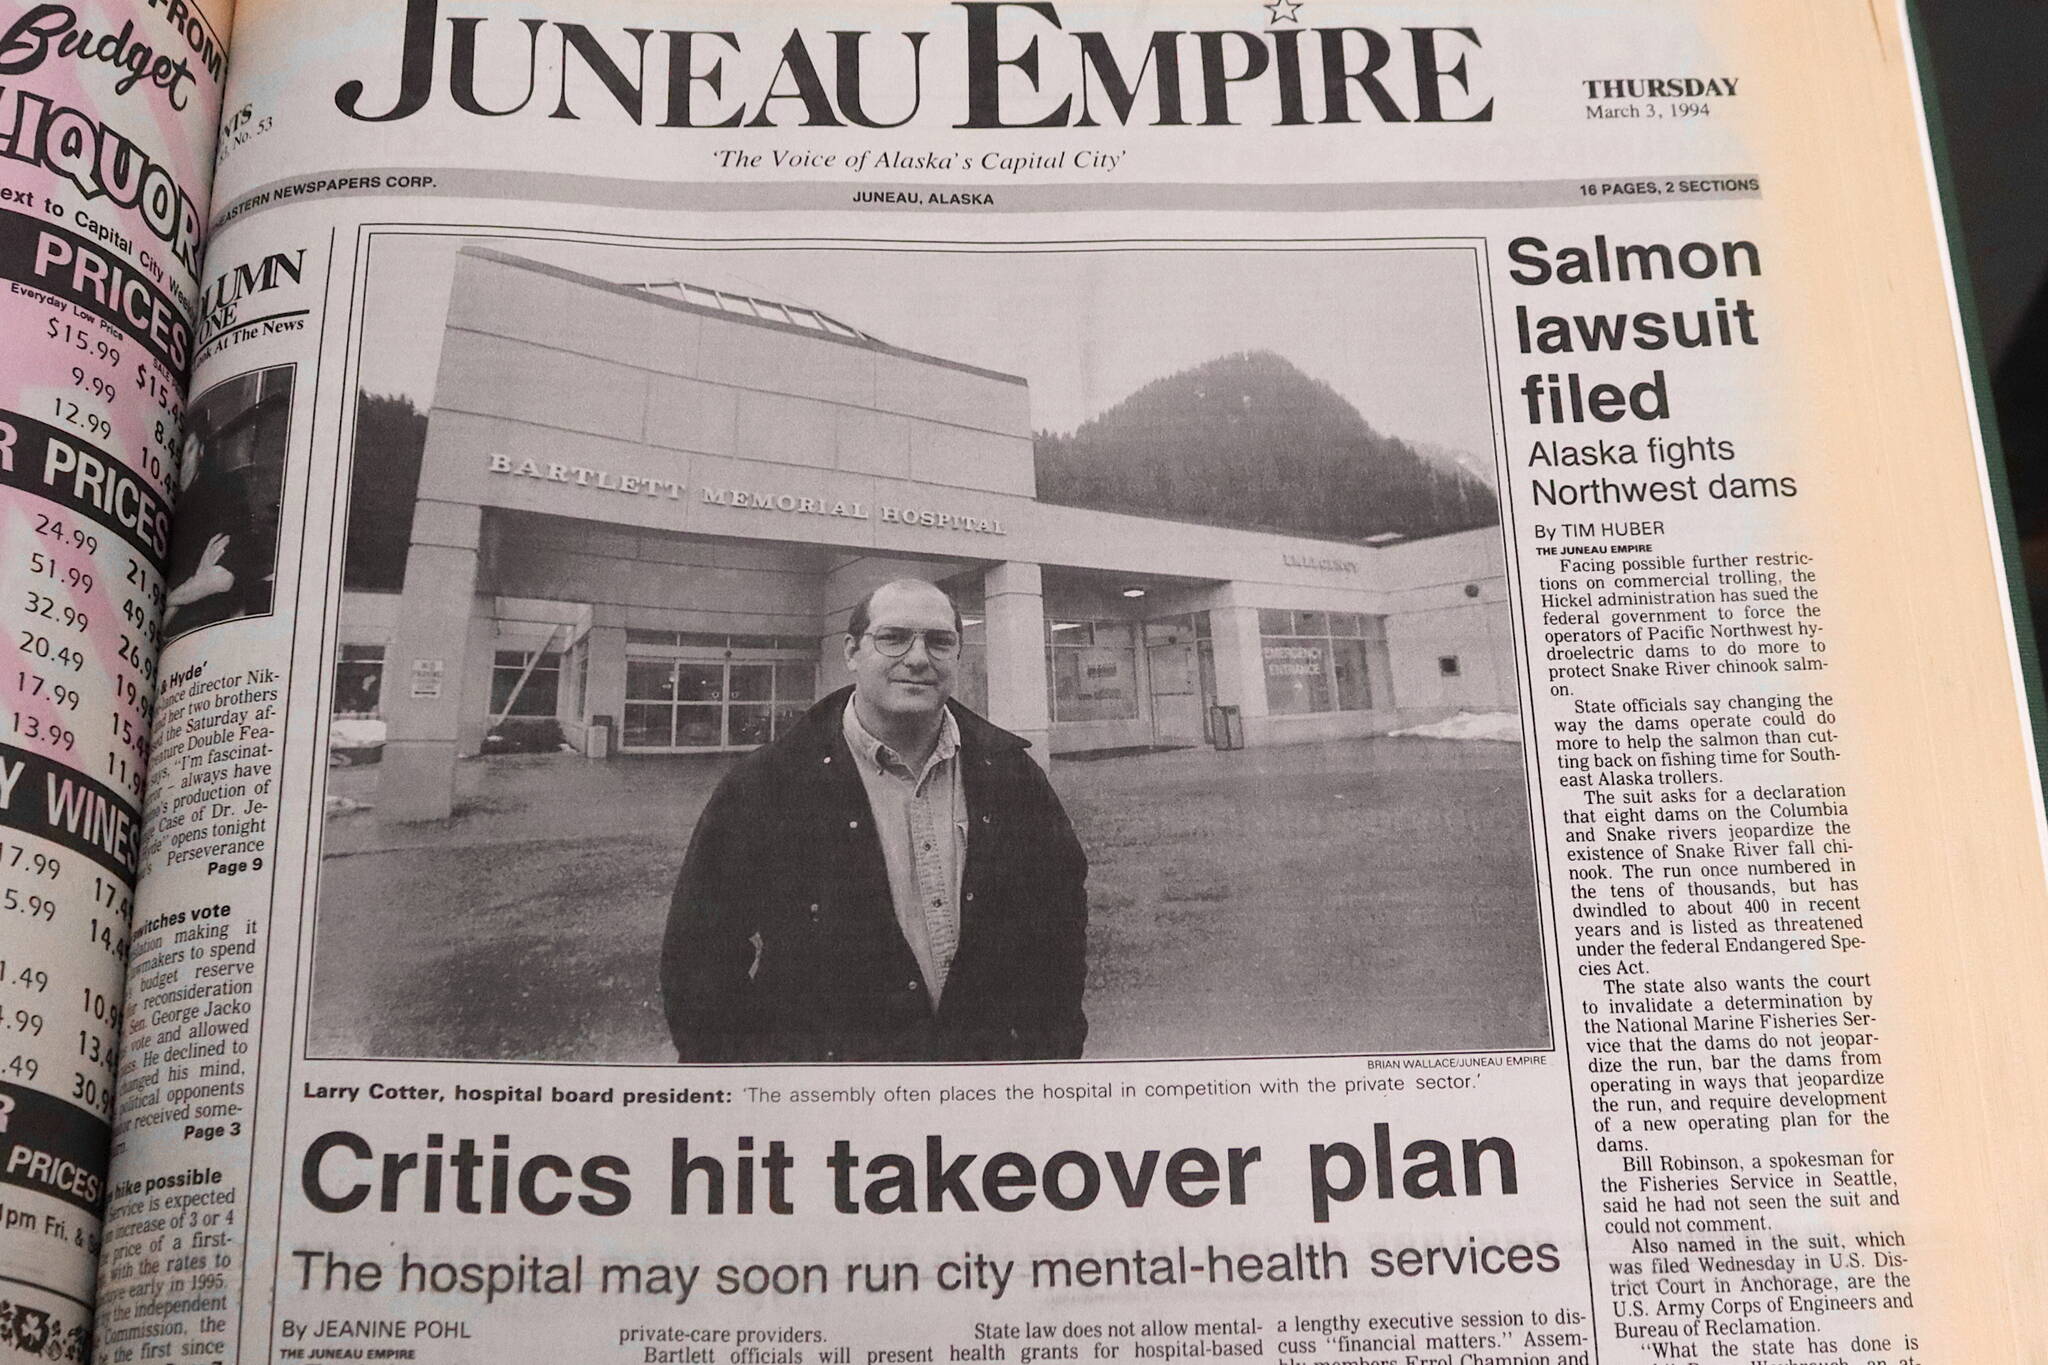 The front page of the Juneau Empire on March 3, 1994. (Mark Sabbatini / Juneau Empire)